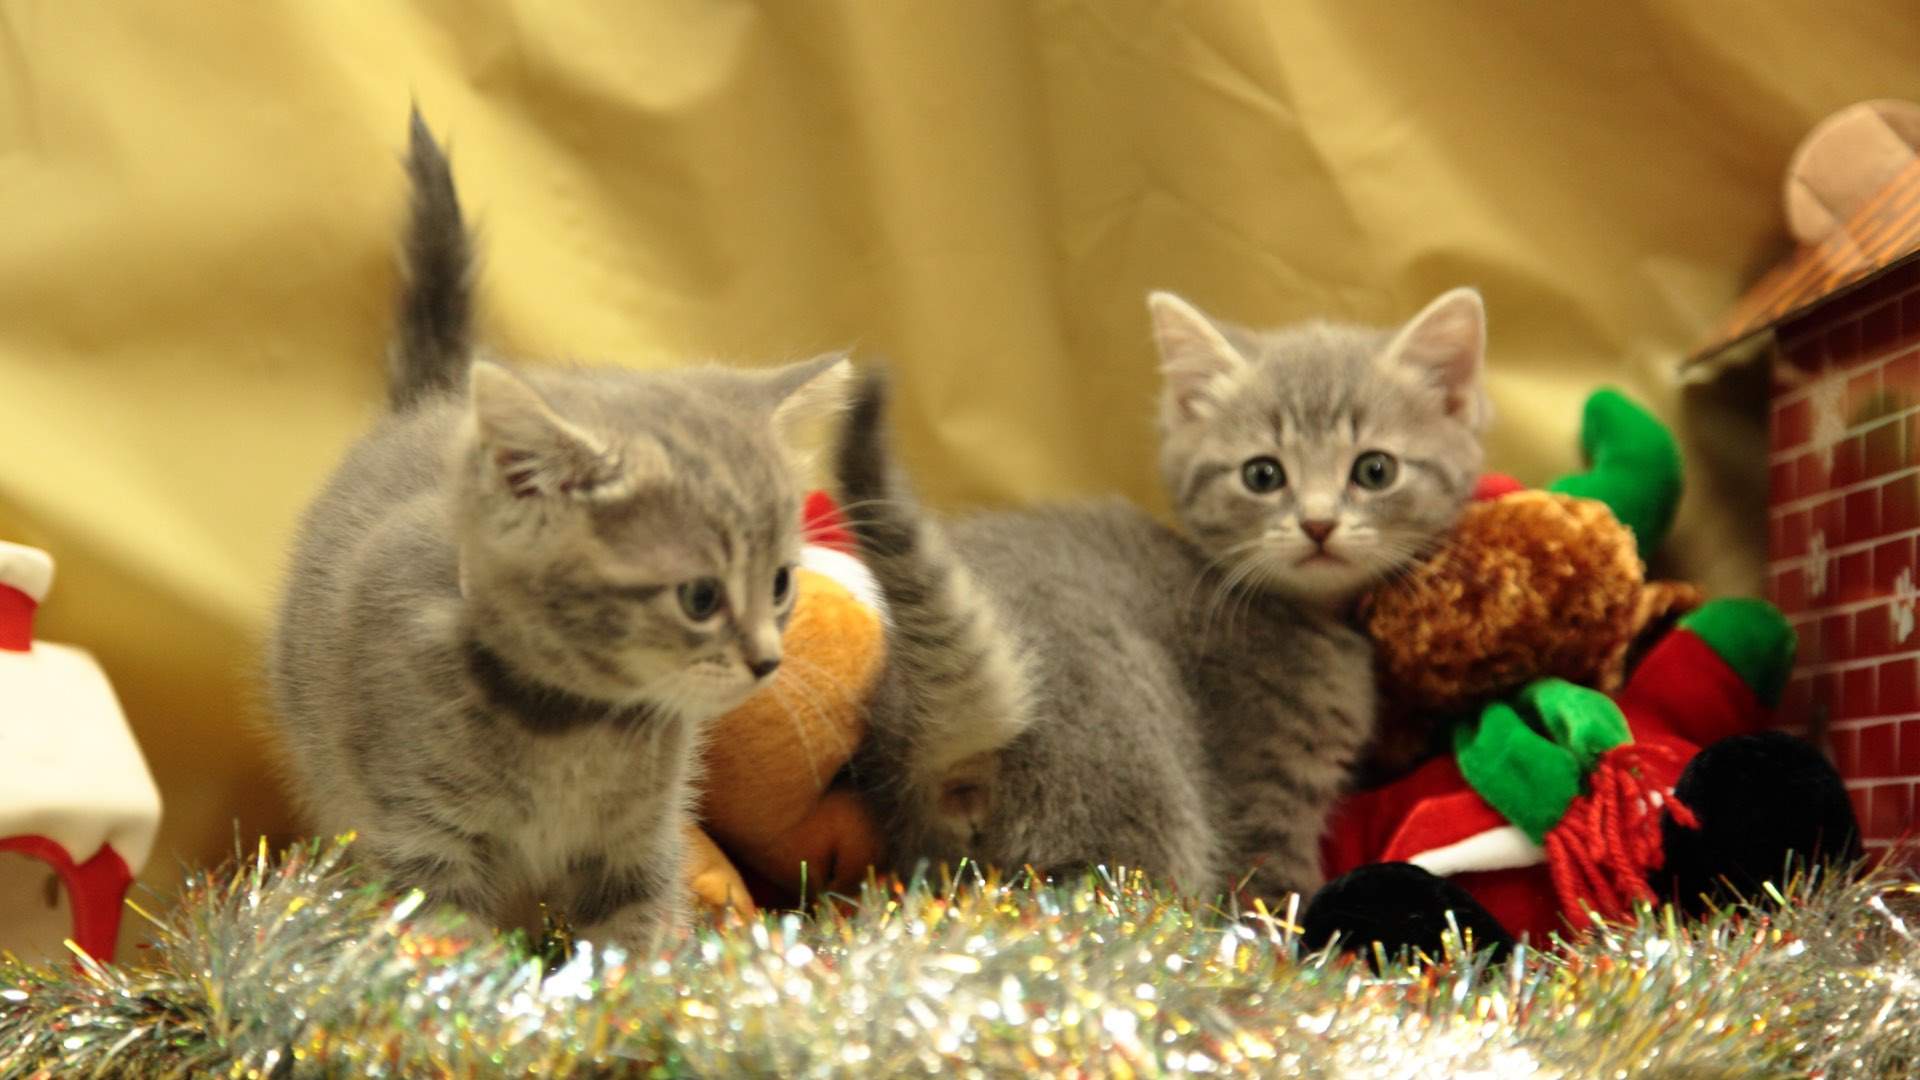 The Cat Protection Society of Victoria Needs New Homes For Kittens Like These